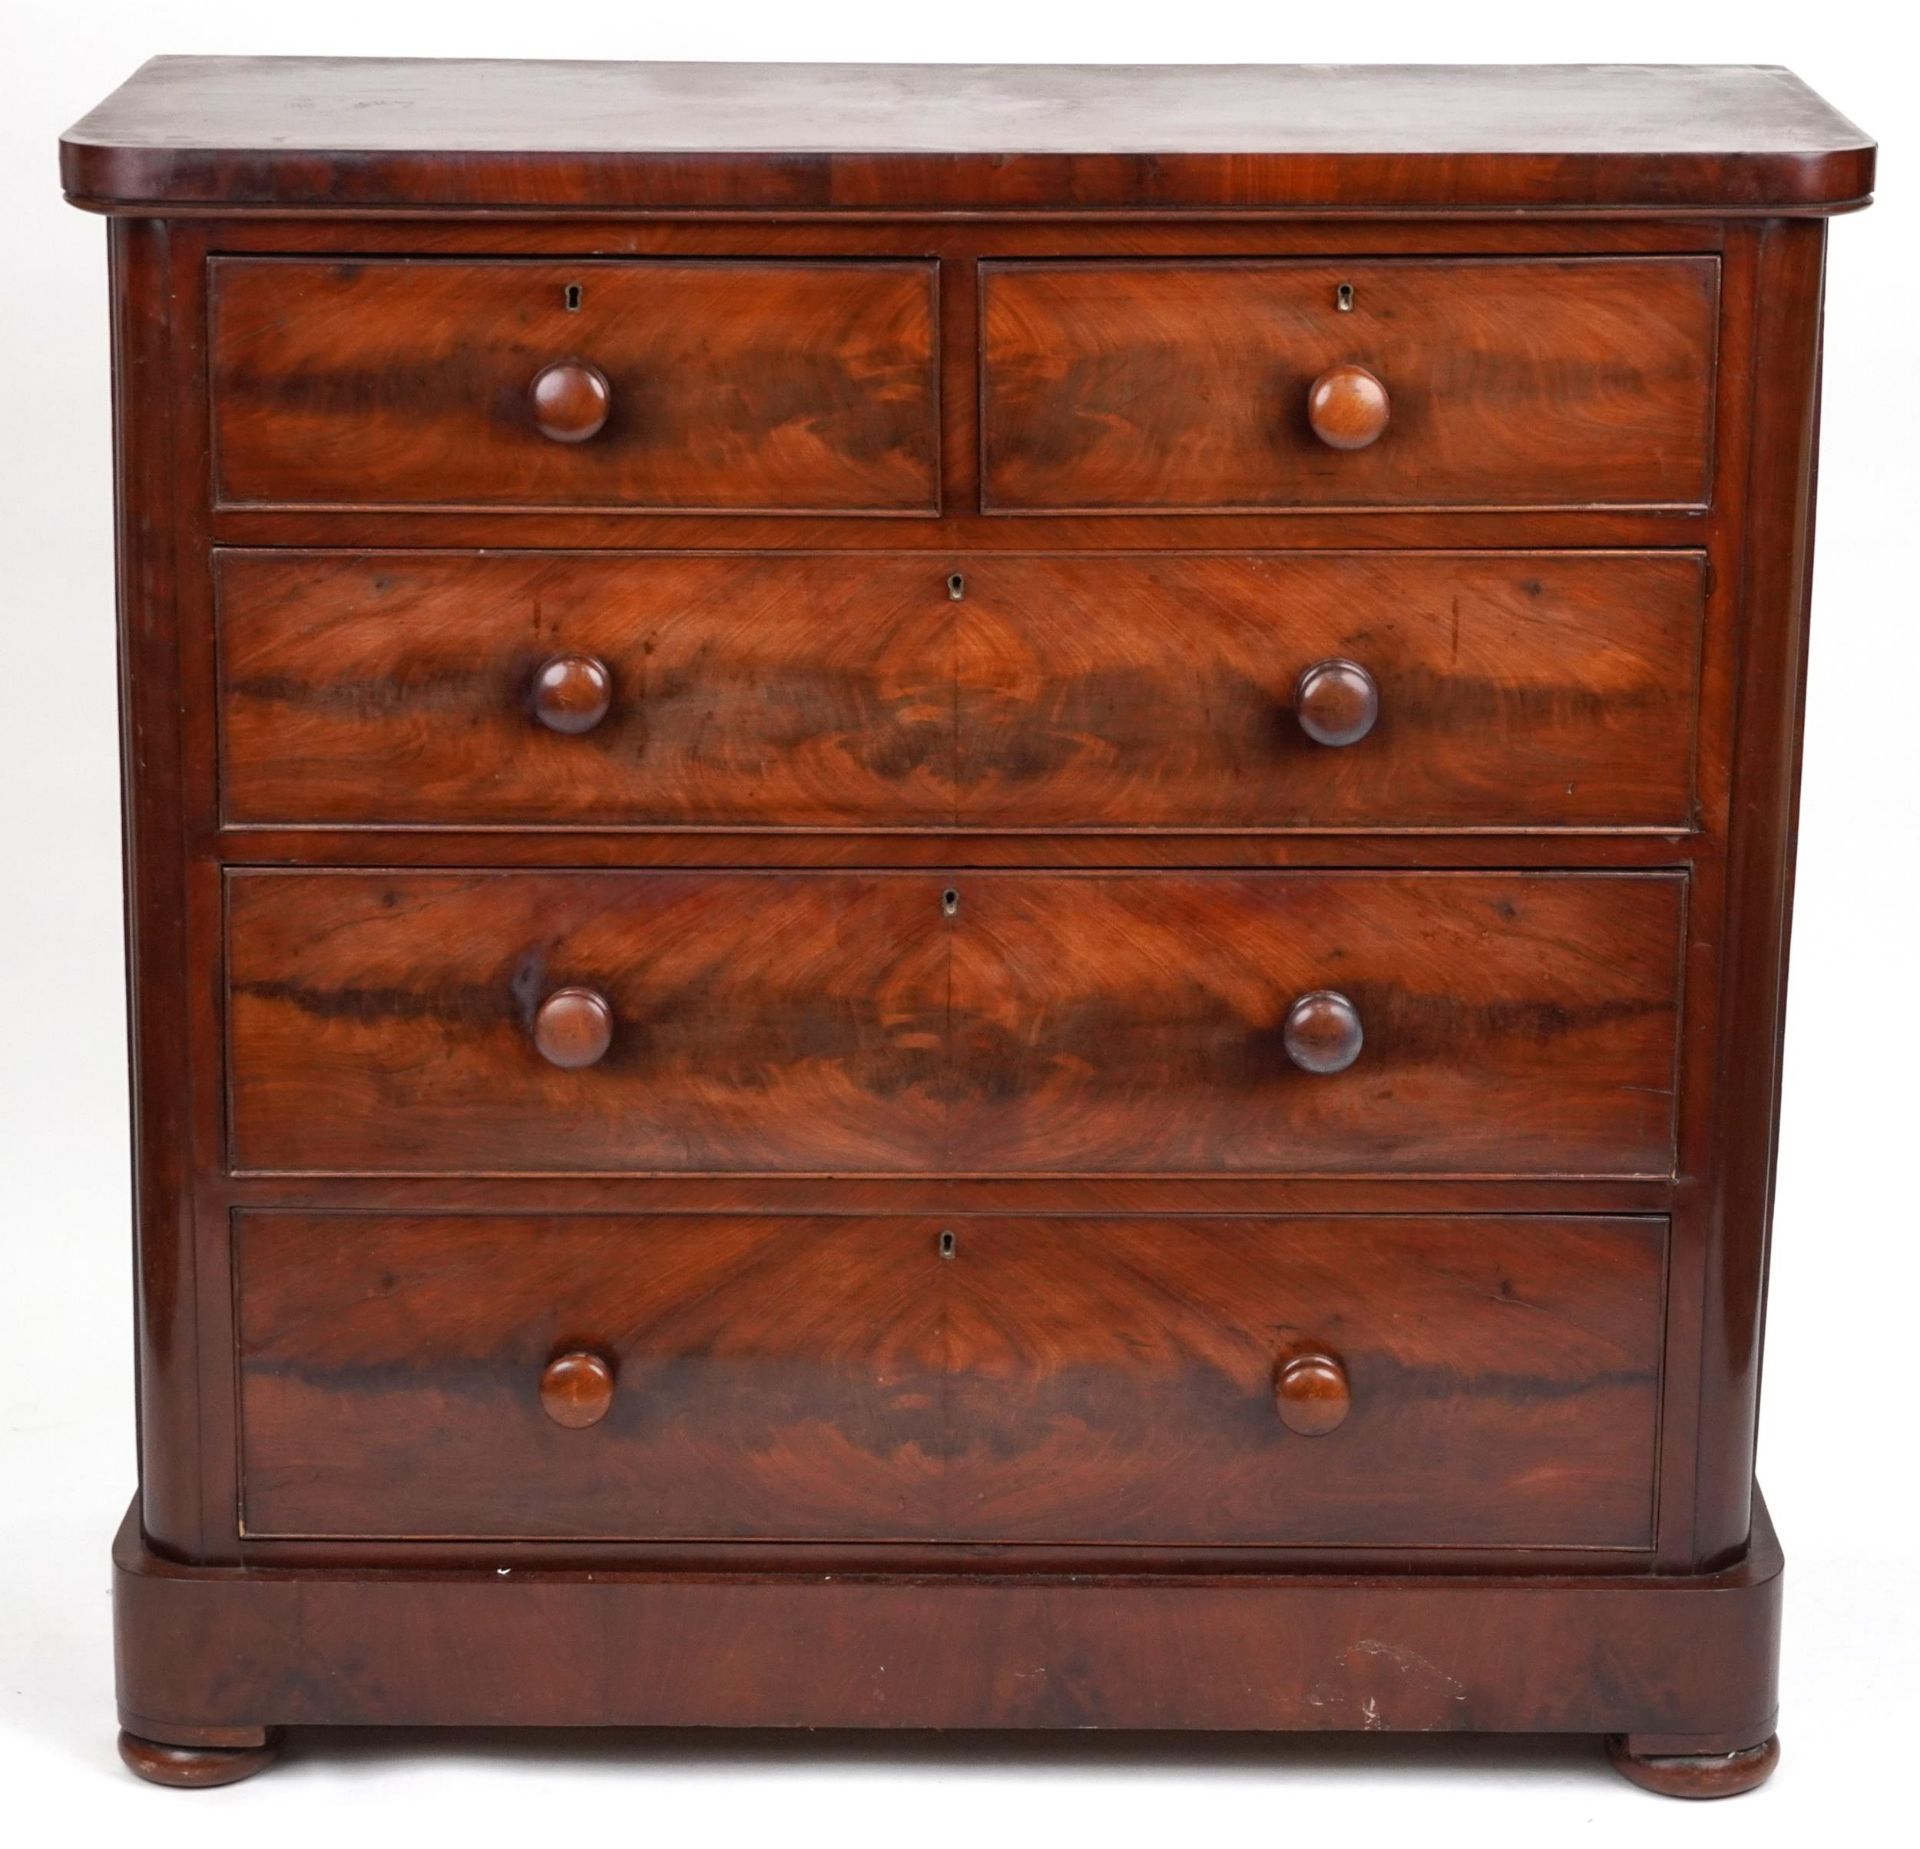 Victorian mahogany five drawer chest with turned wood handles, 117cm H x 121cm W x 51cm D : For - Image 2 of 4